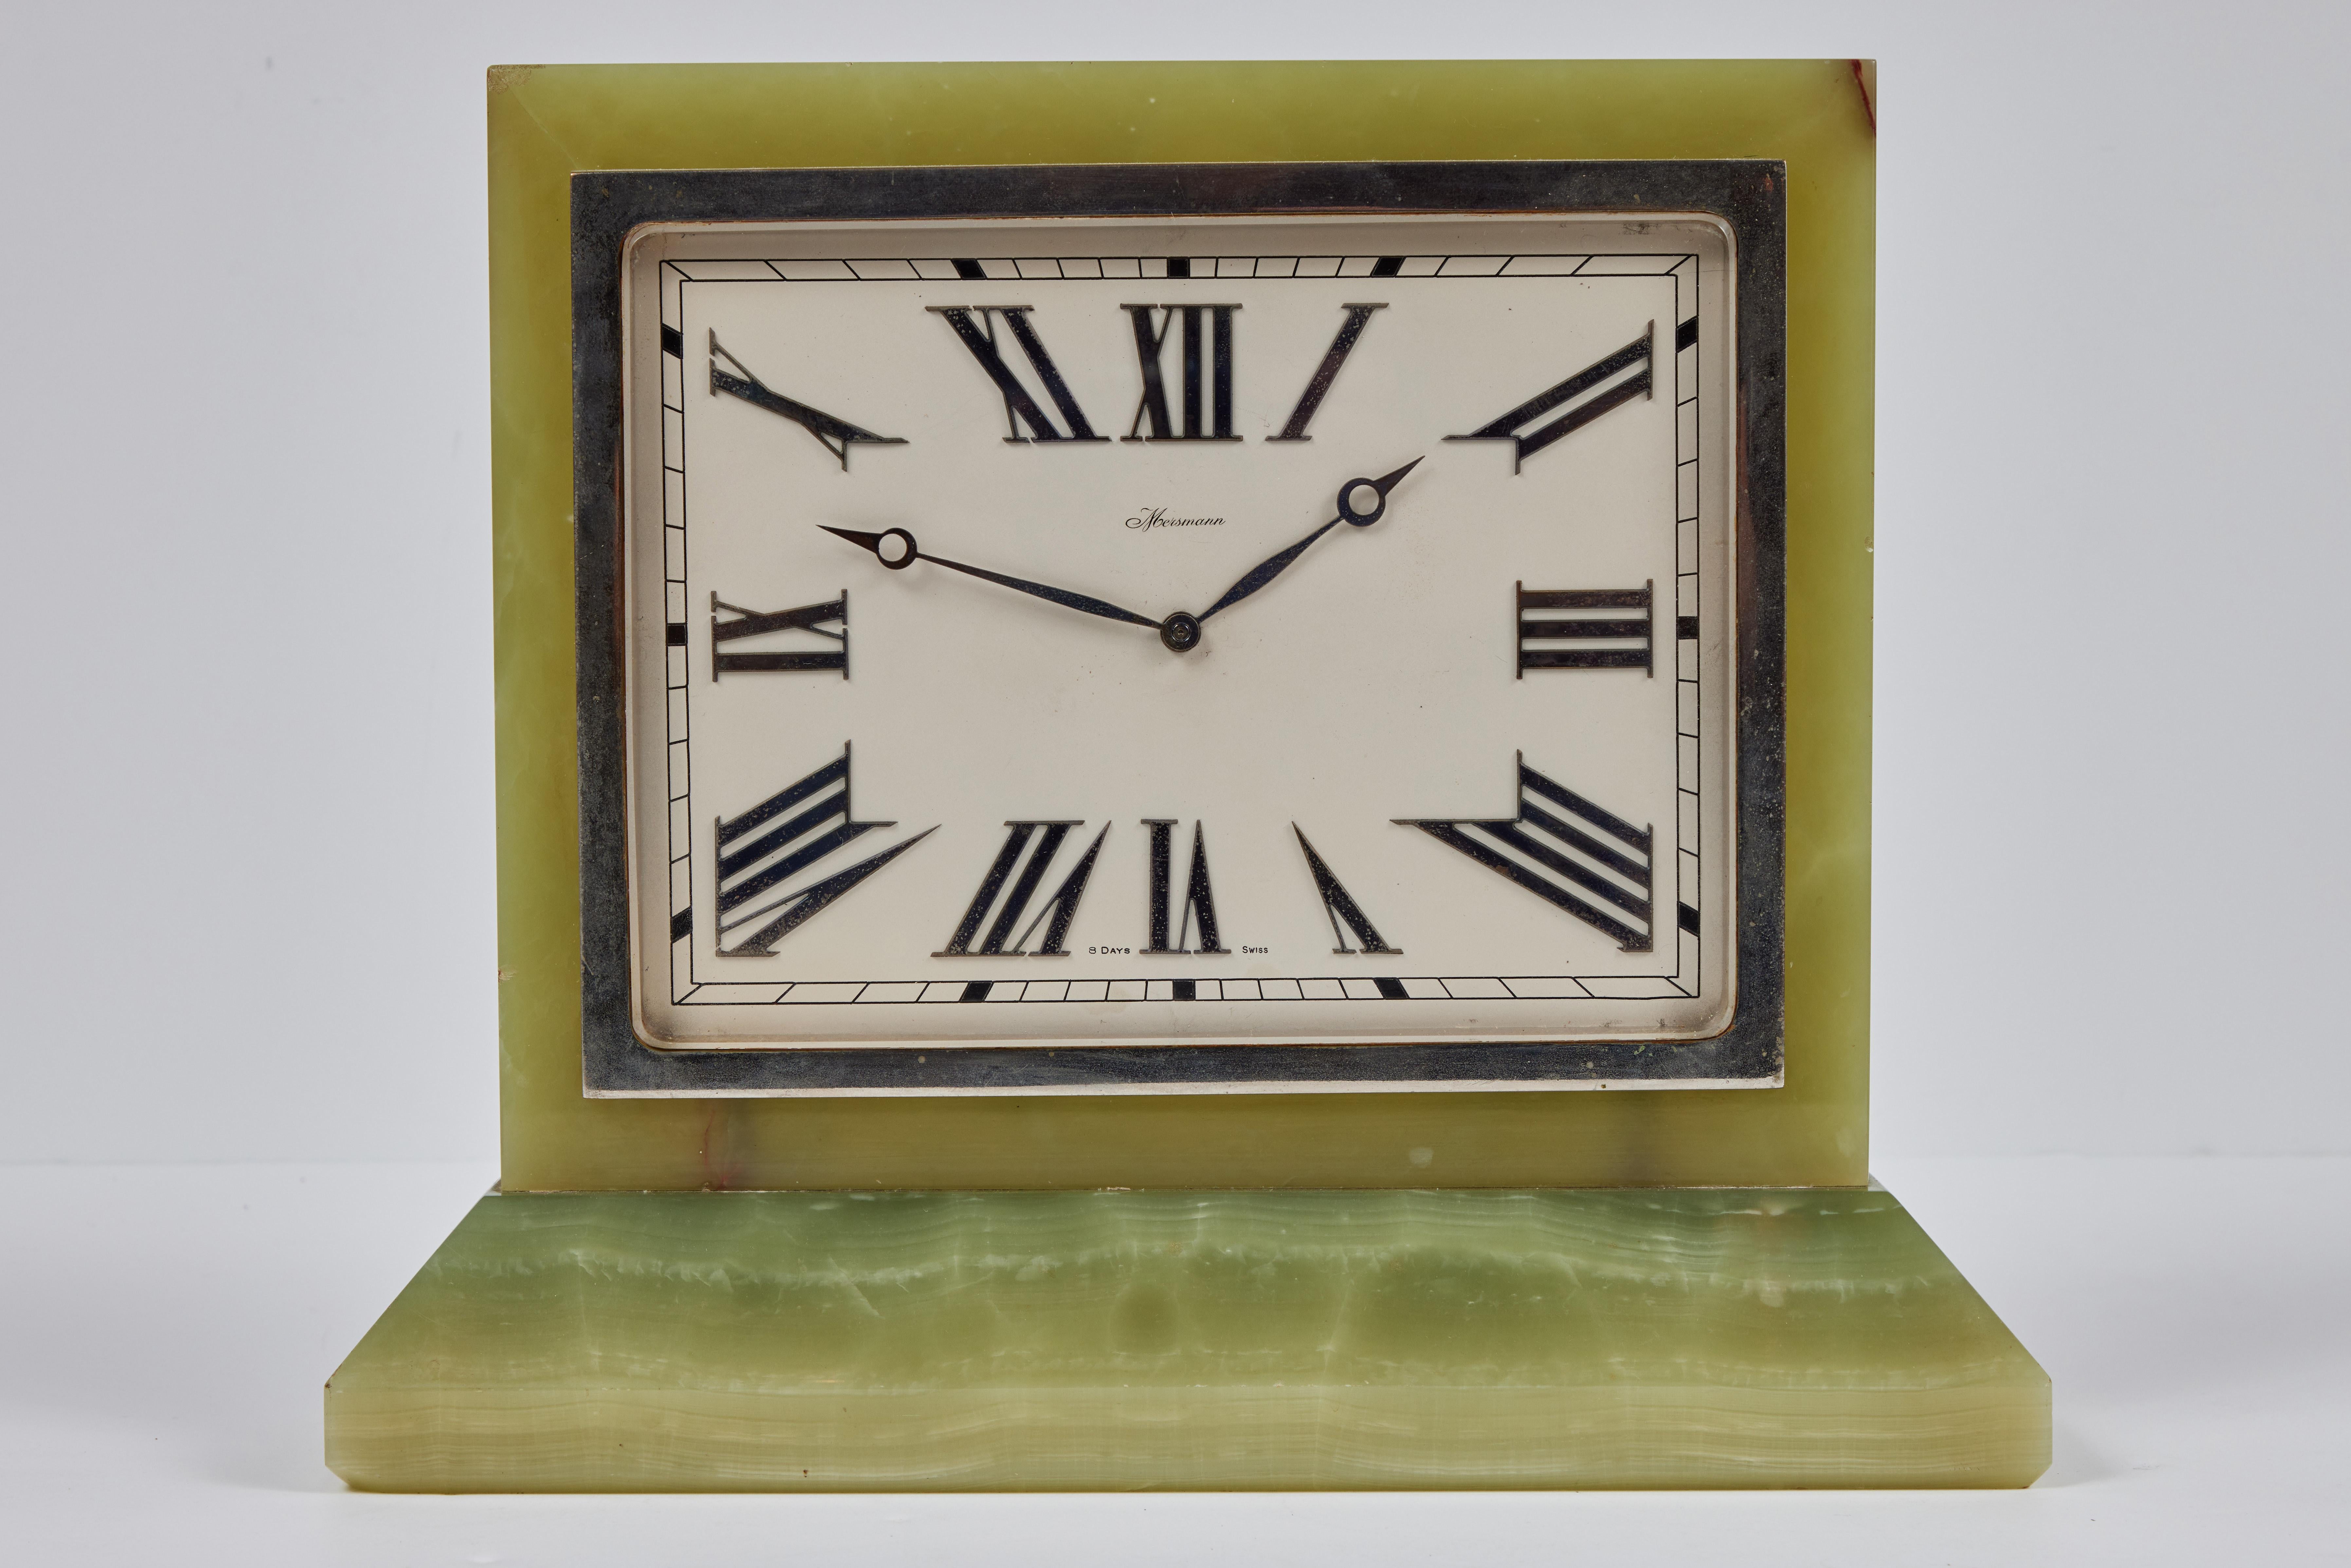 A stylish, large, looping table clock from Swiss maker, Mersmann. The rectangular time piece reading 